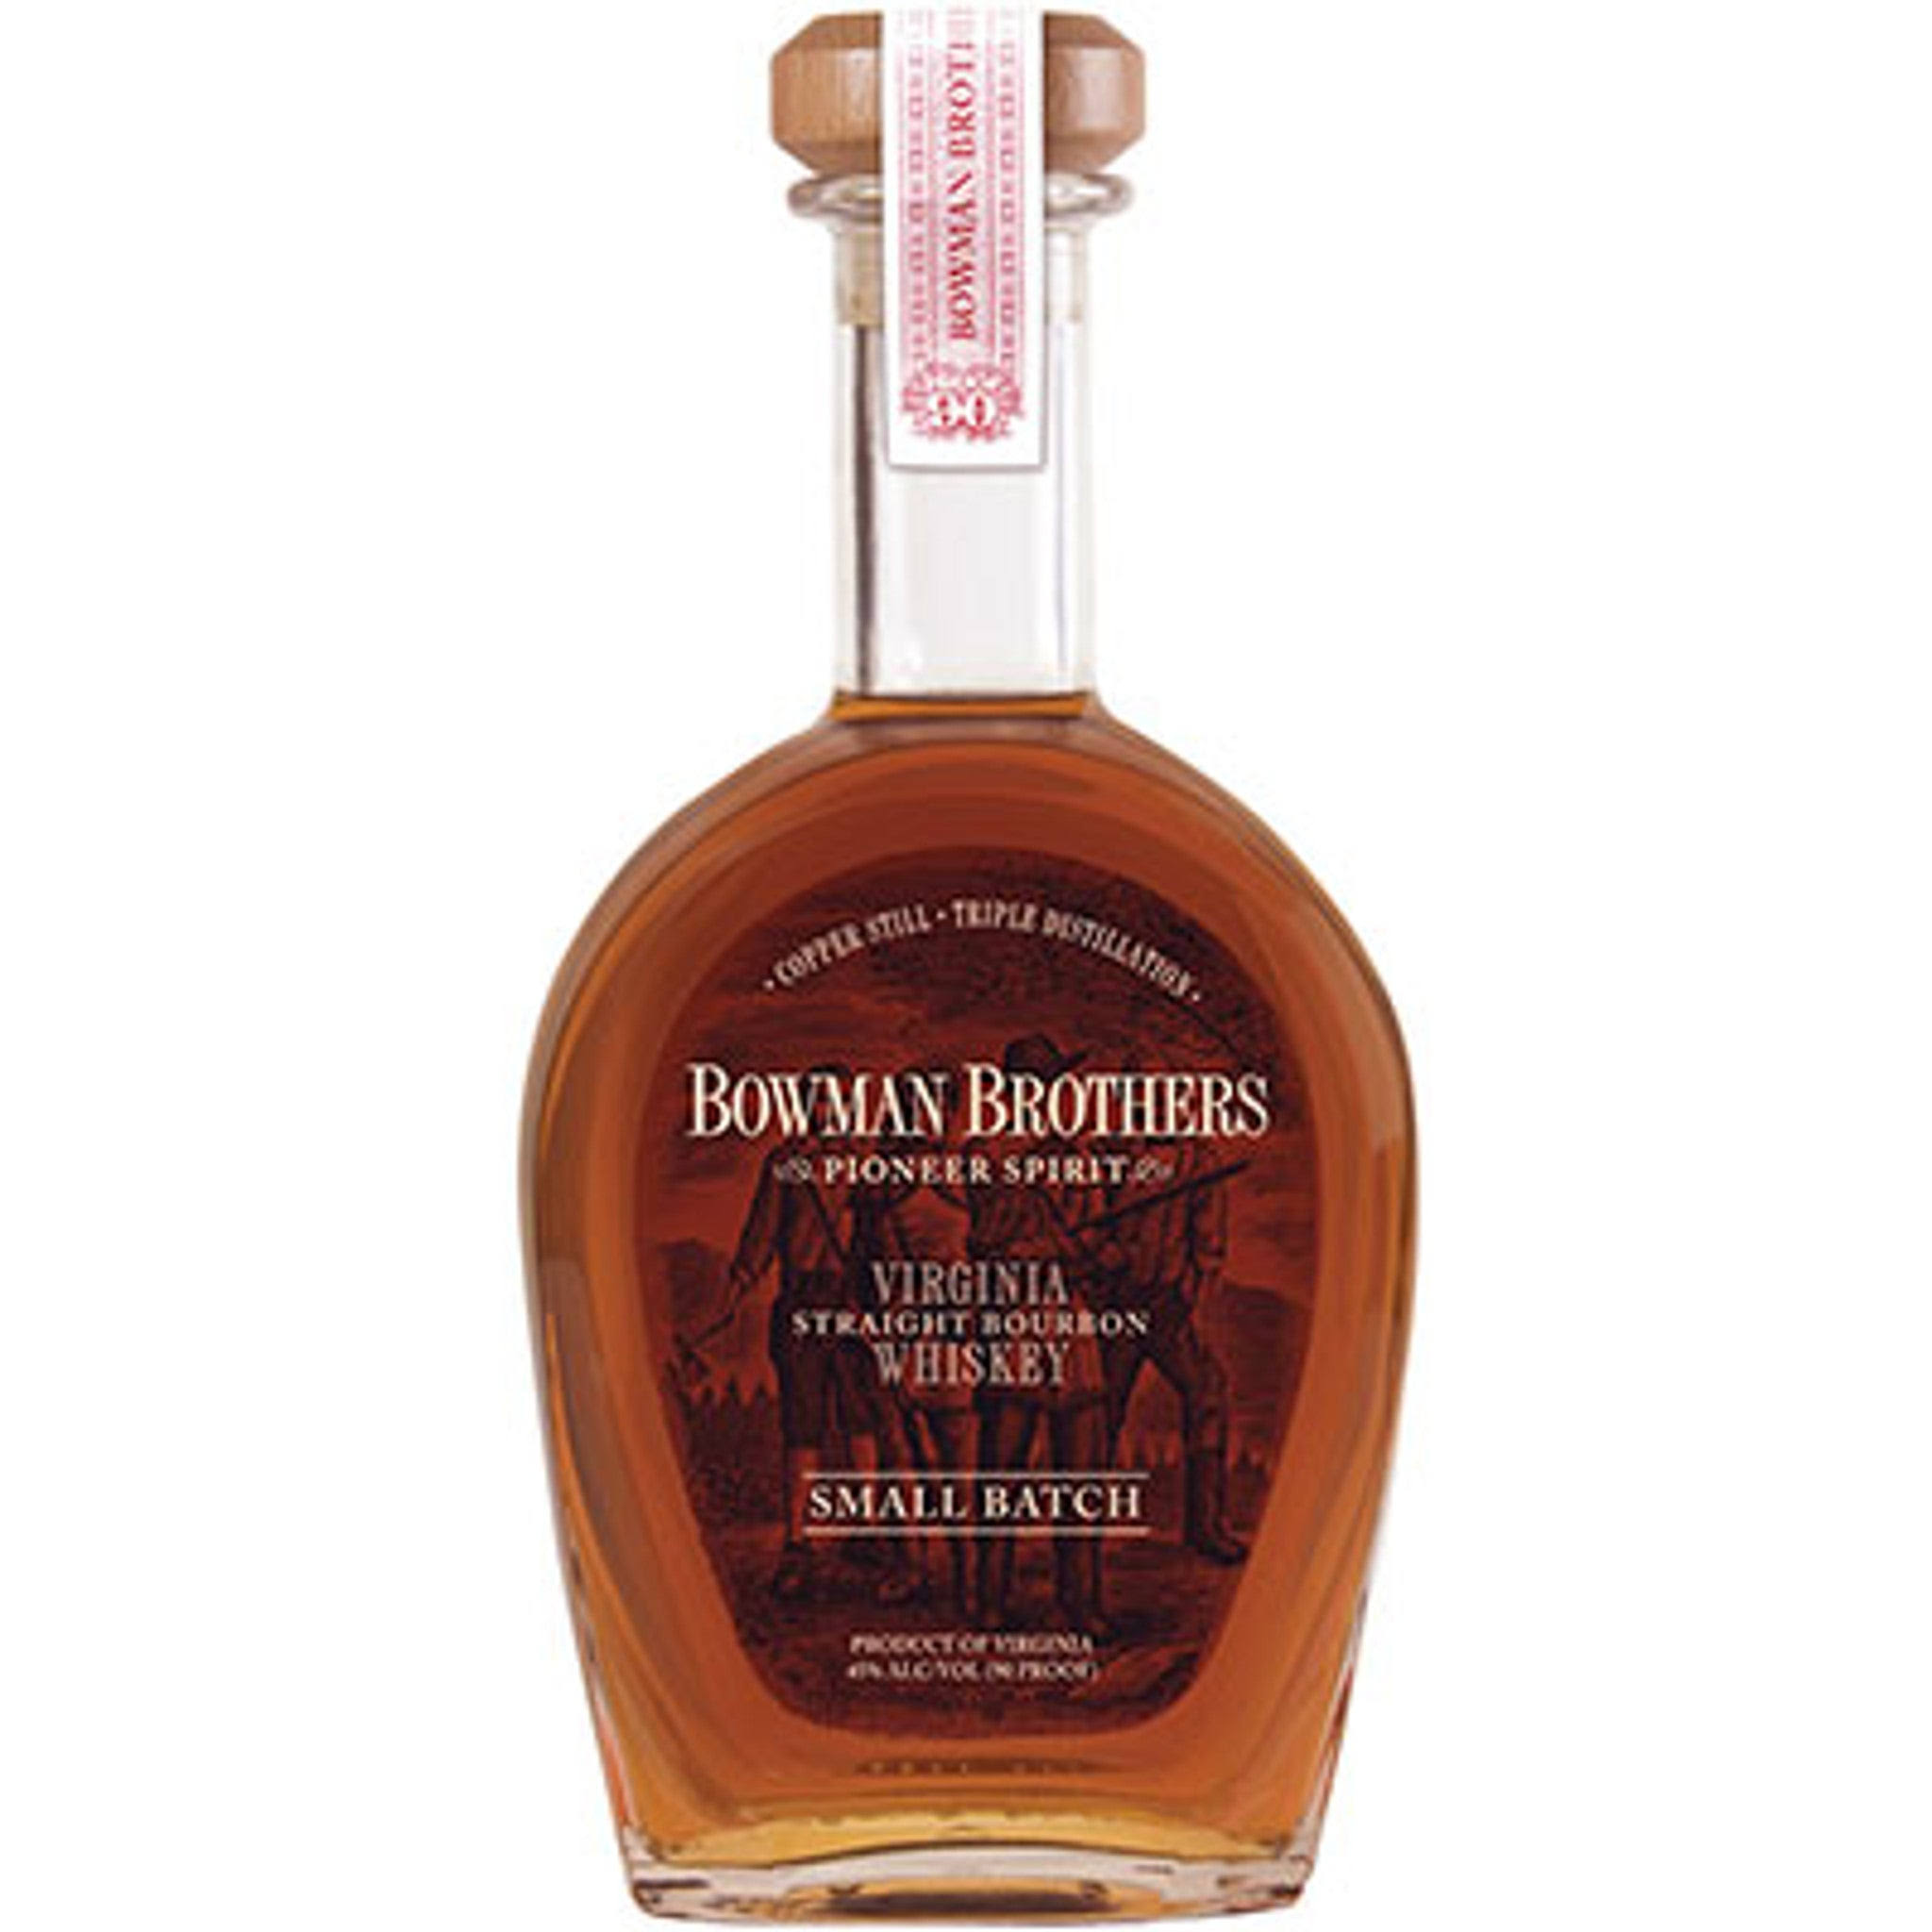 Bowman Brothers Straight Bourbon Whiskey